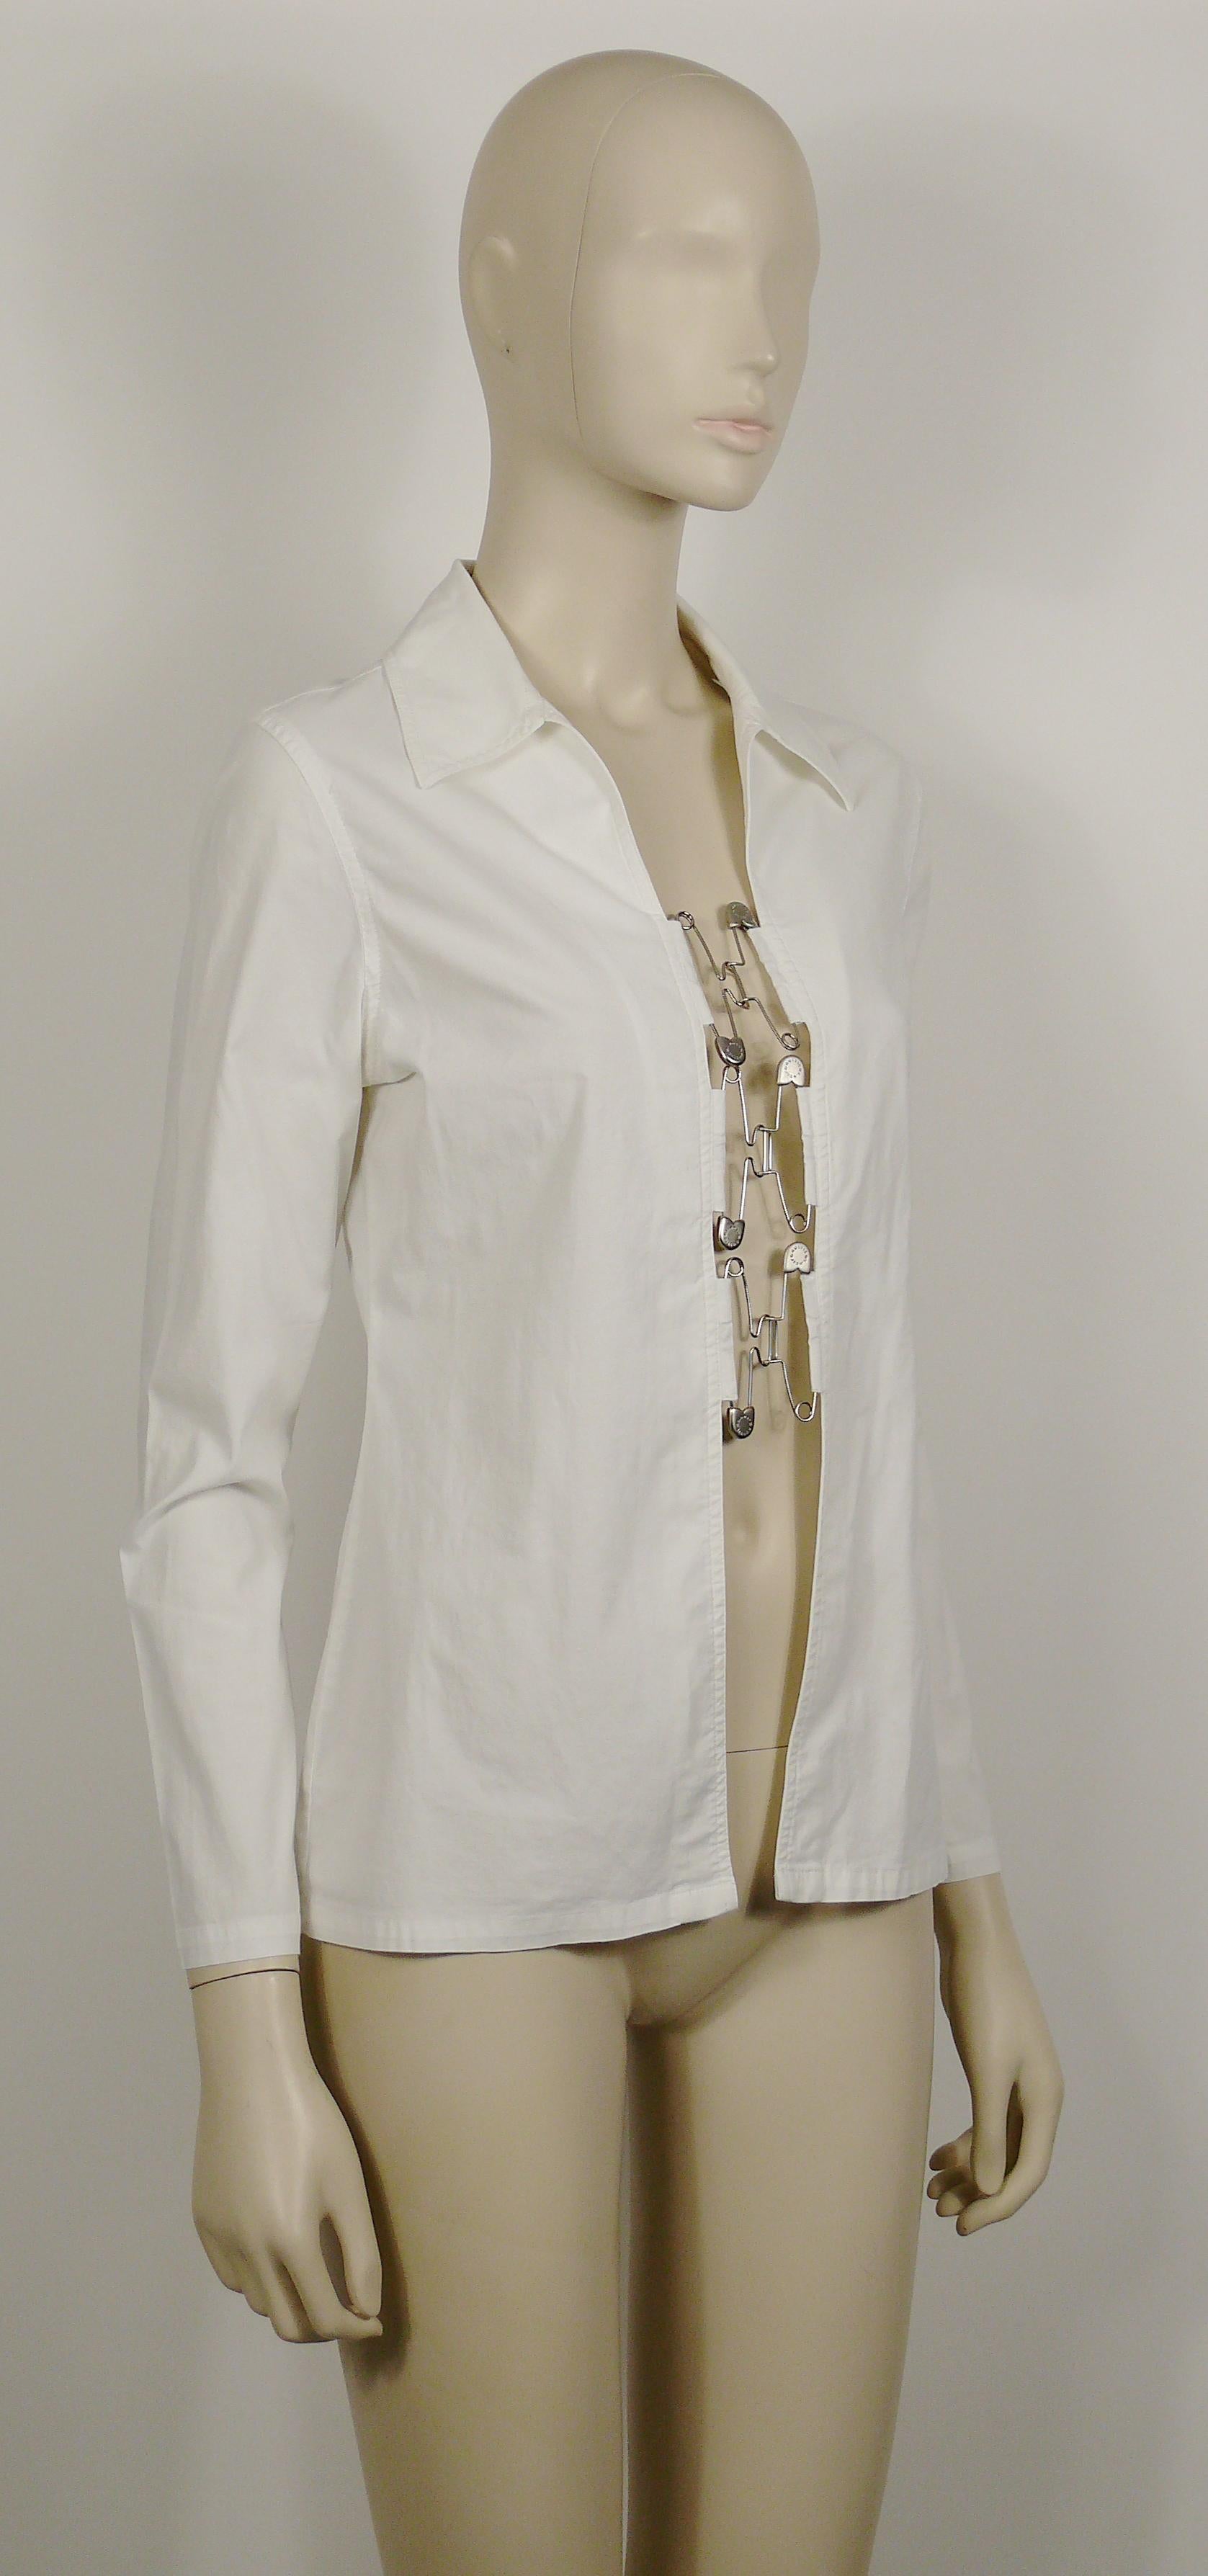 JEAN PAUL GAULTIER vintage white shirt featuring safety pin hook closures at the front.

Missing brand label (cut out).
Back bolduc ribbon GAULTIER JEAN'S.

Missing size tag.
Please check the measurements.

Missing composition tag (probably cotton